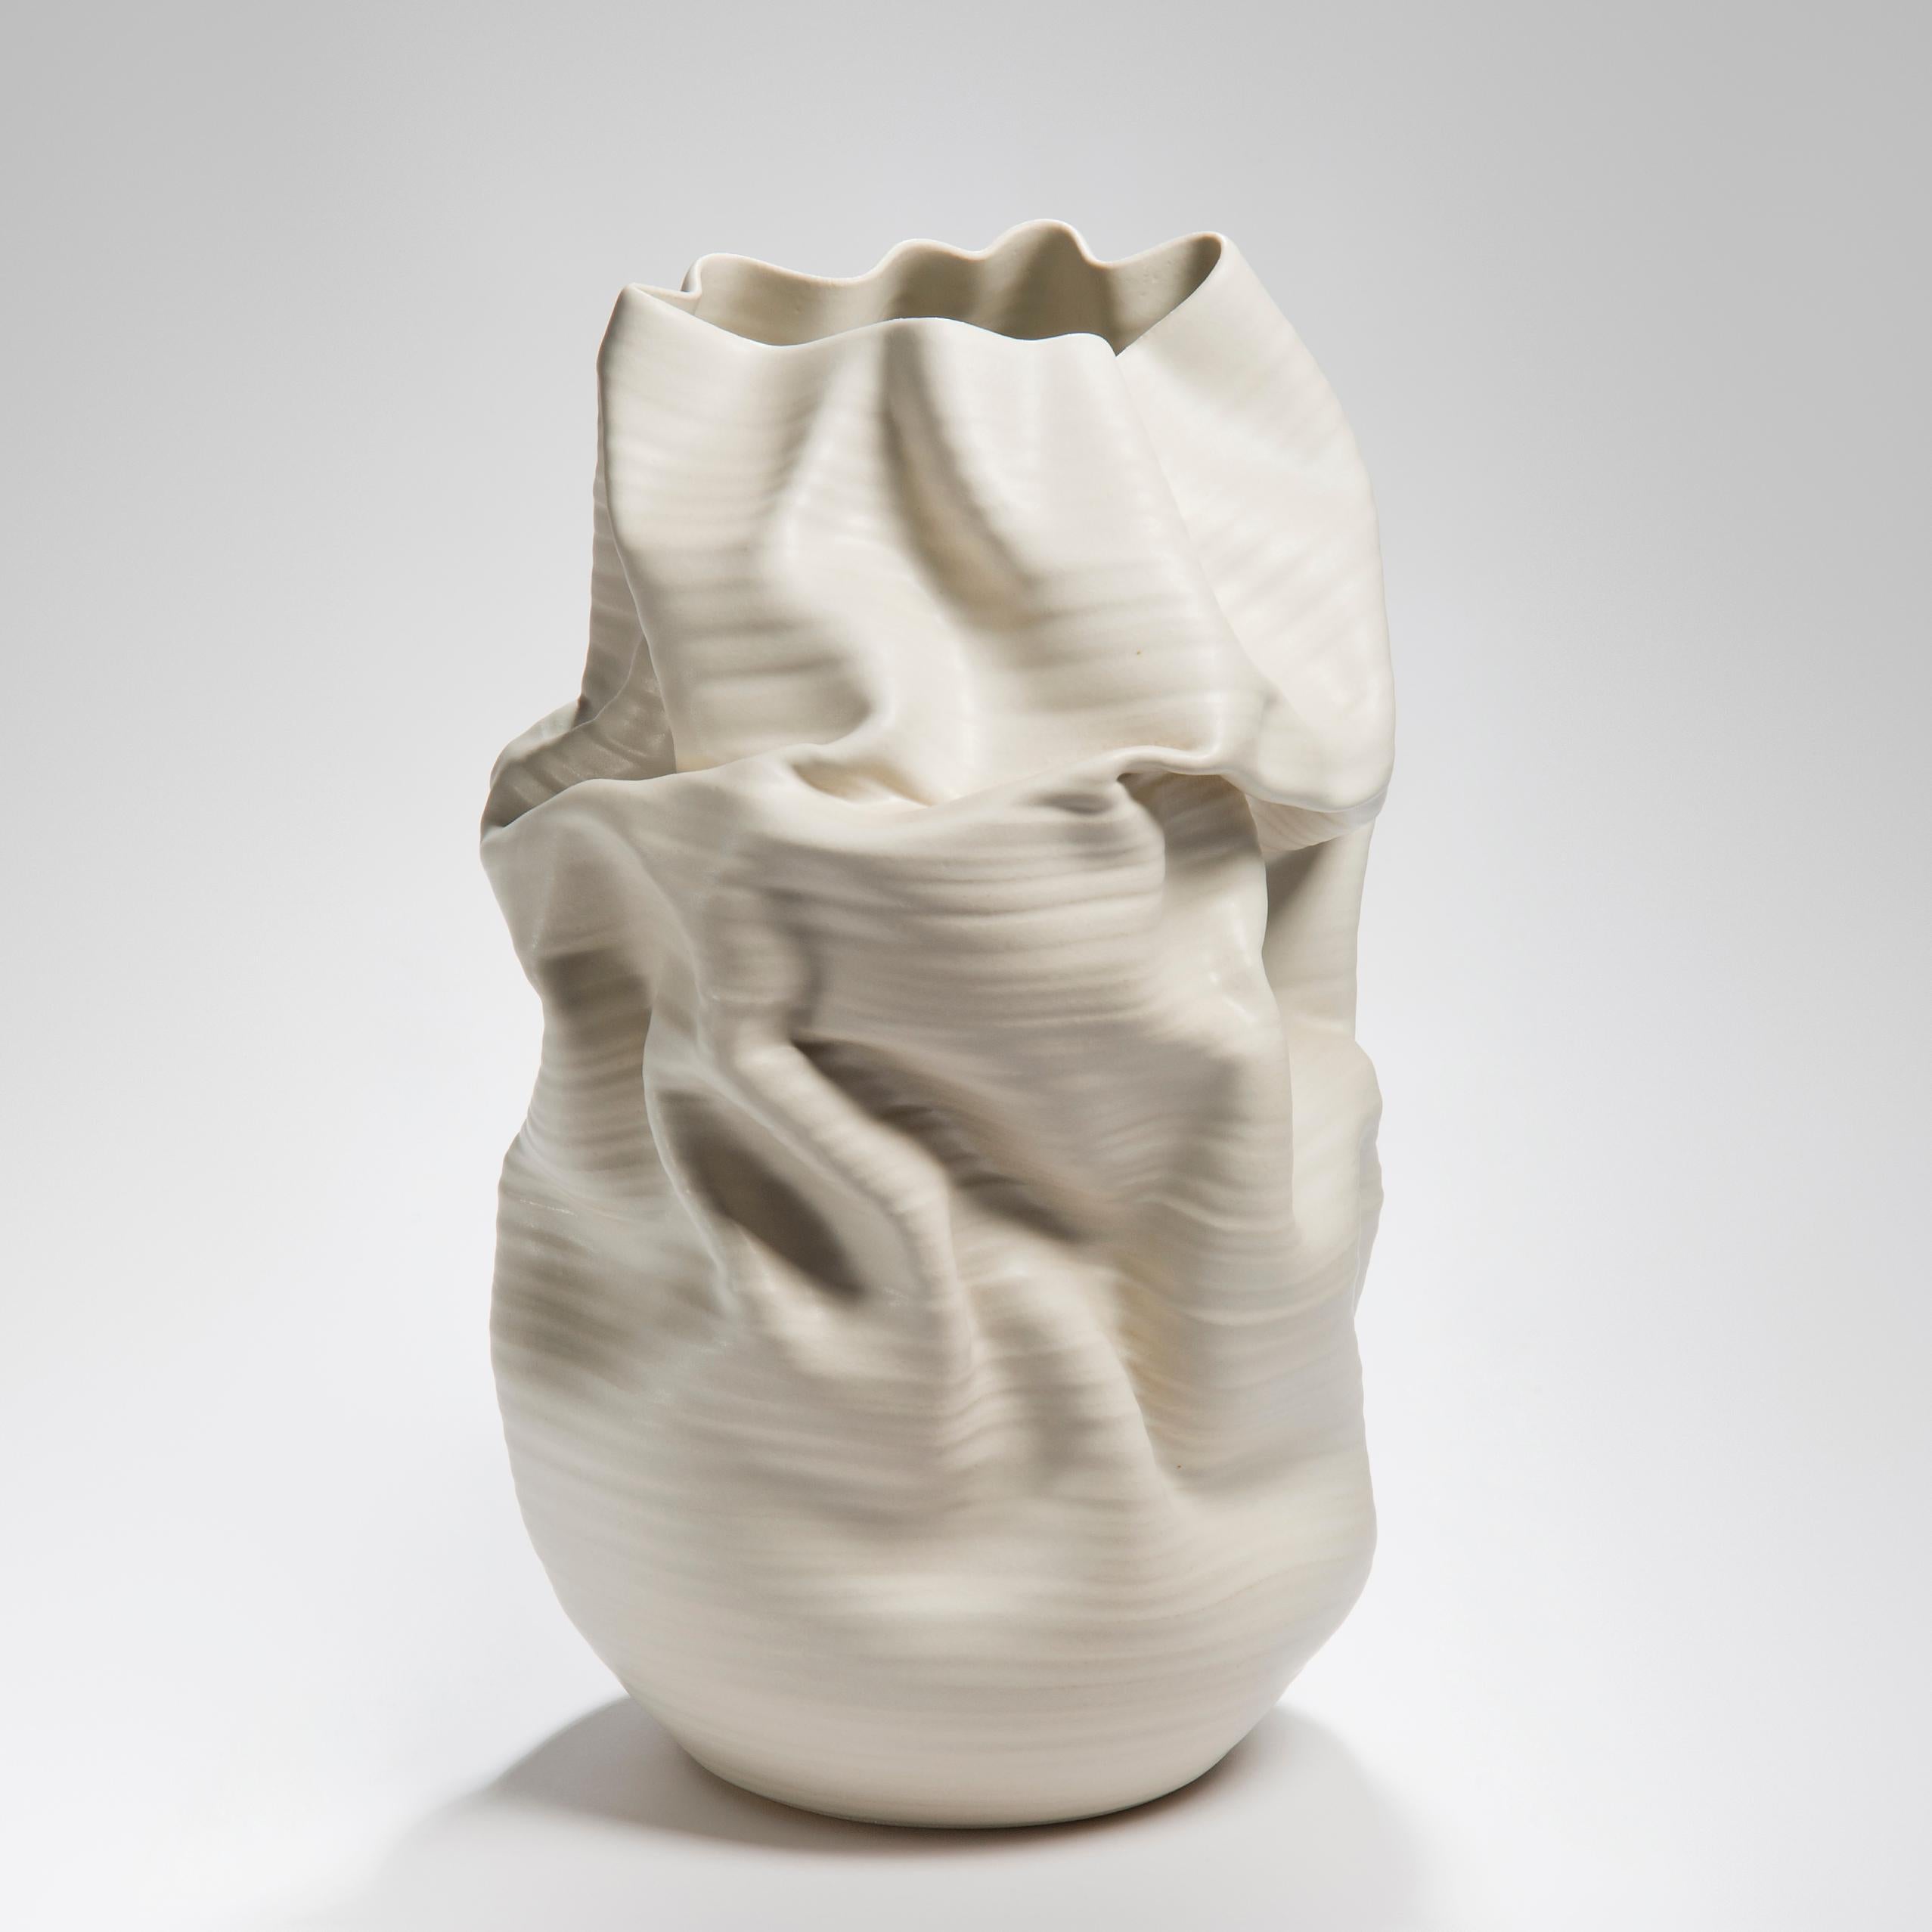 White Crumpled Form No 37 is a unique ceramic sculptural vessel by the British artist Nicholas Arroyave-Portela.

Nicholas Arroyave-Portela’s professional ceramic practice began in 1994. After 20 years based in London, he moved and set up his